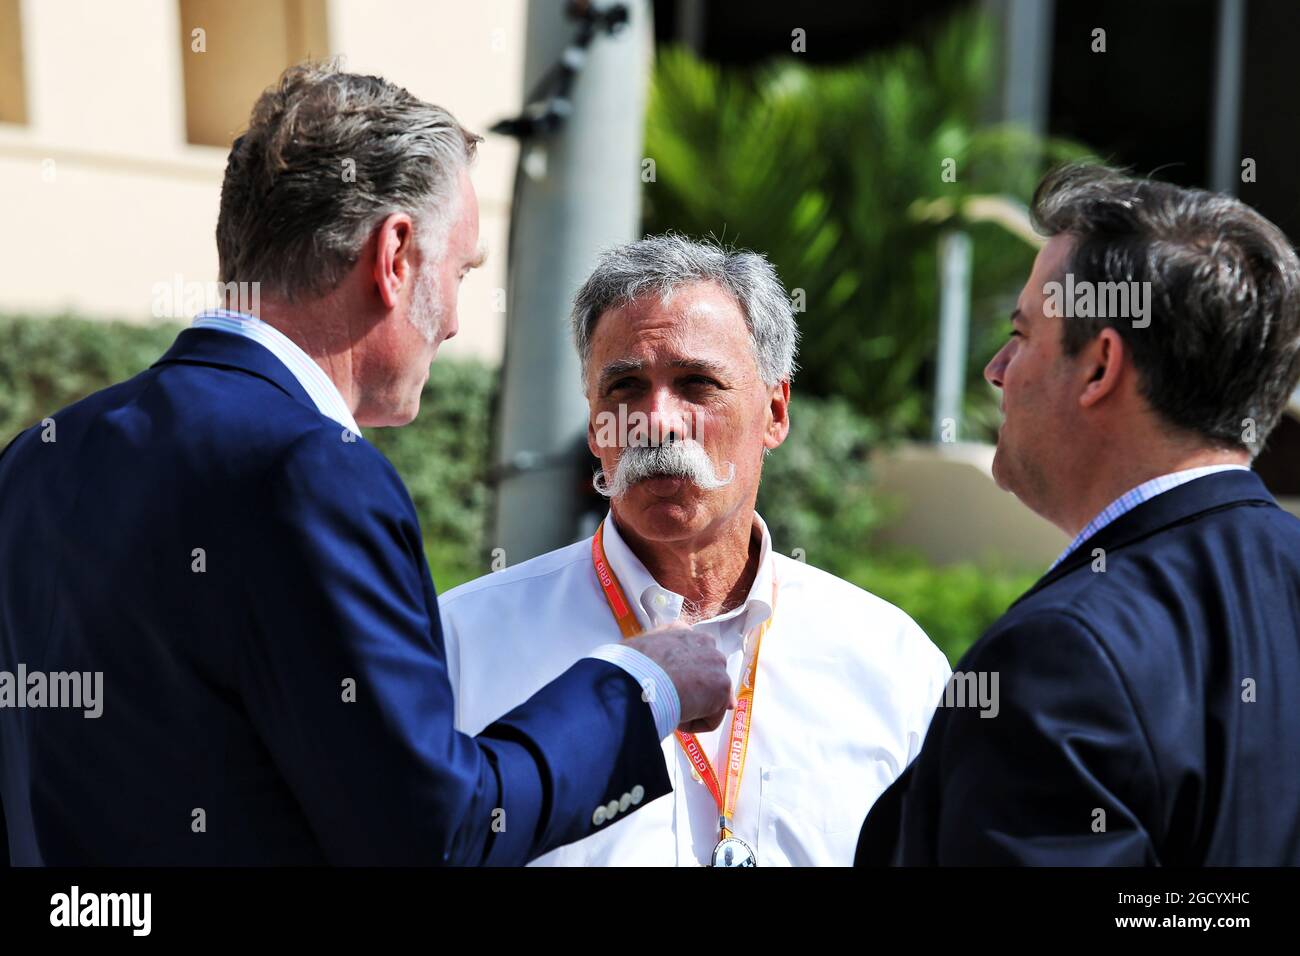 Chase Carey (USA) Formula One Group Chairman and Sean Bratches (USA) Formula 1 Managing Director, Commercial Operations. Bahrain Grand Prix, Sunday 31st March 2019. Sakhir, Bahrain. Stock Photo